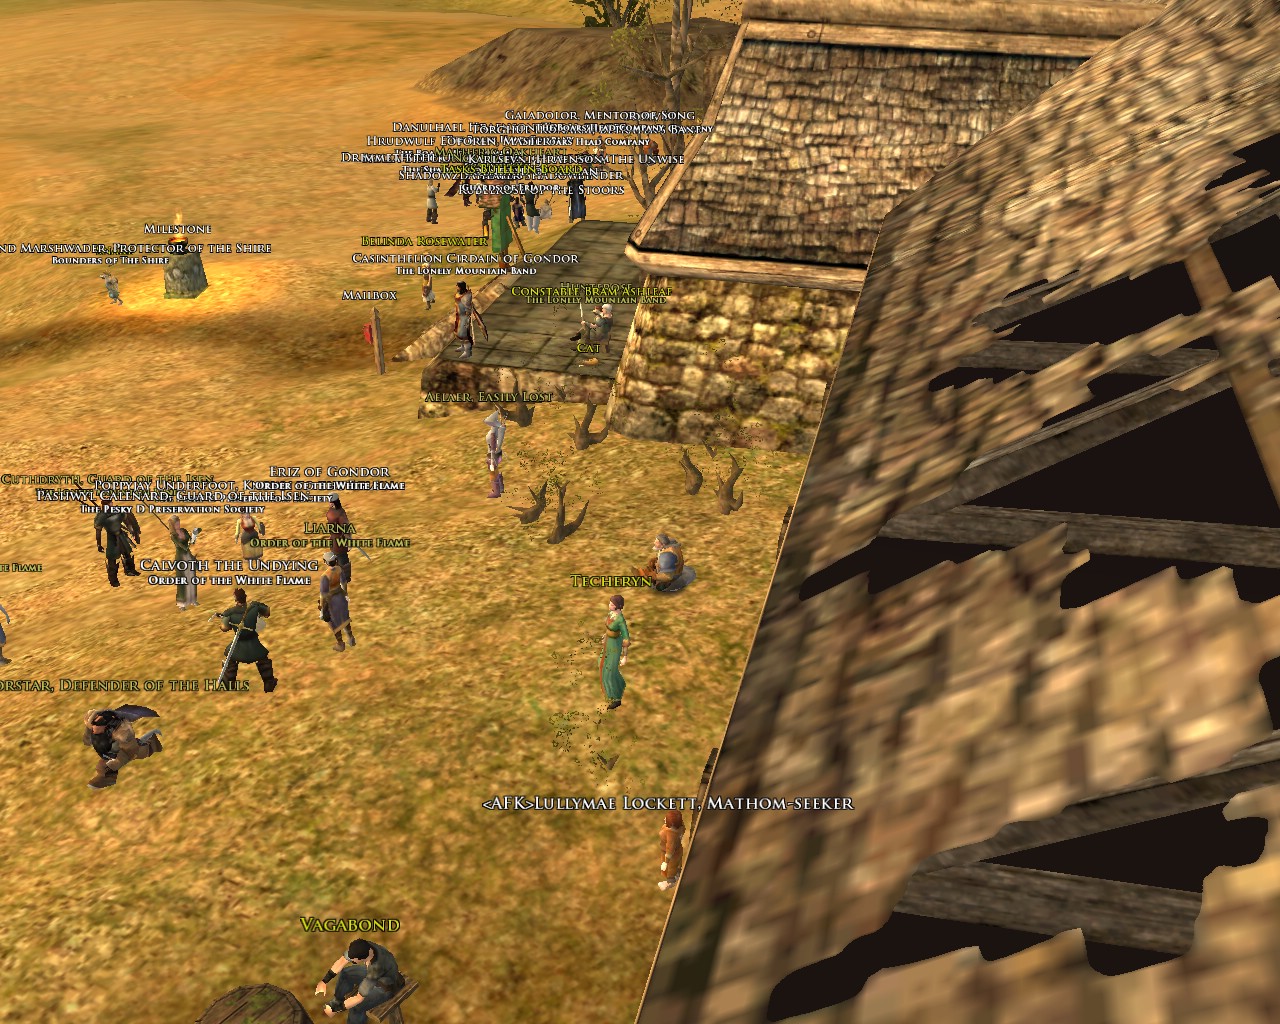 Image: Still 2 hours to Weatherstock - small party at the Forsaken Inn 01